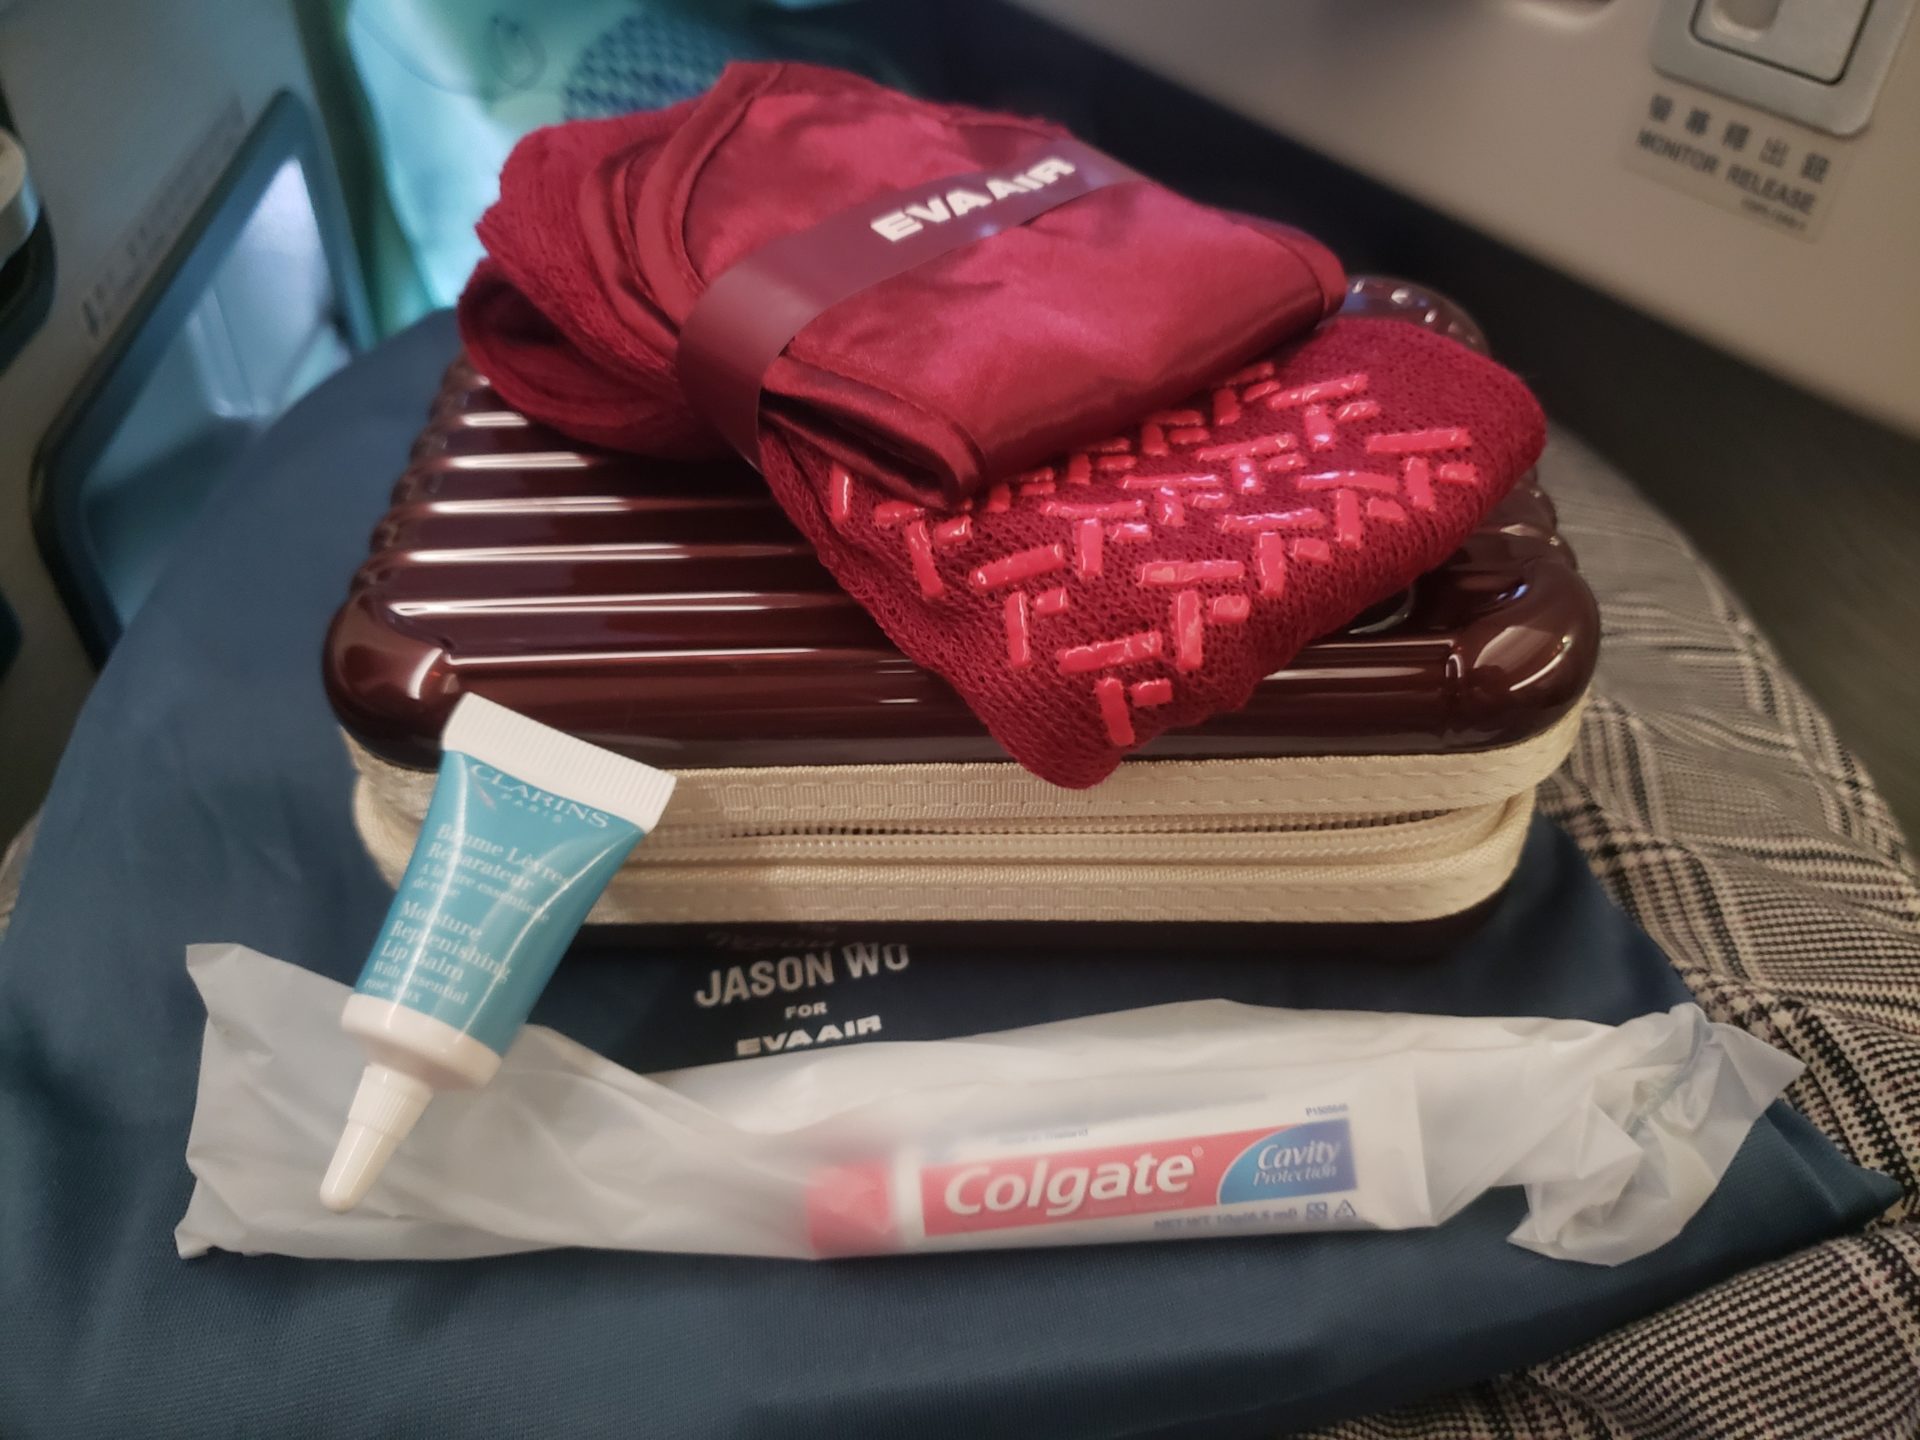 a suitcase with a red towel and a tube of toothpaste on a blue surface